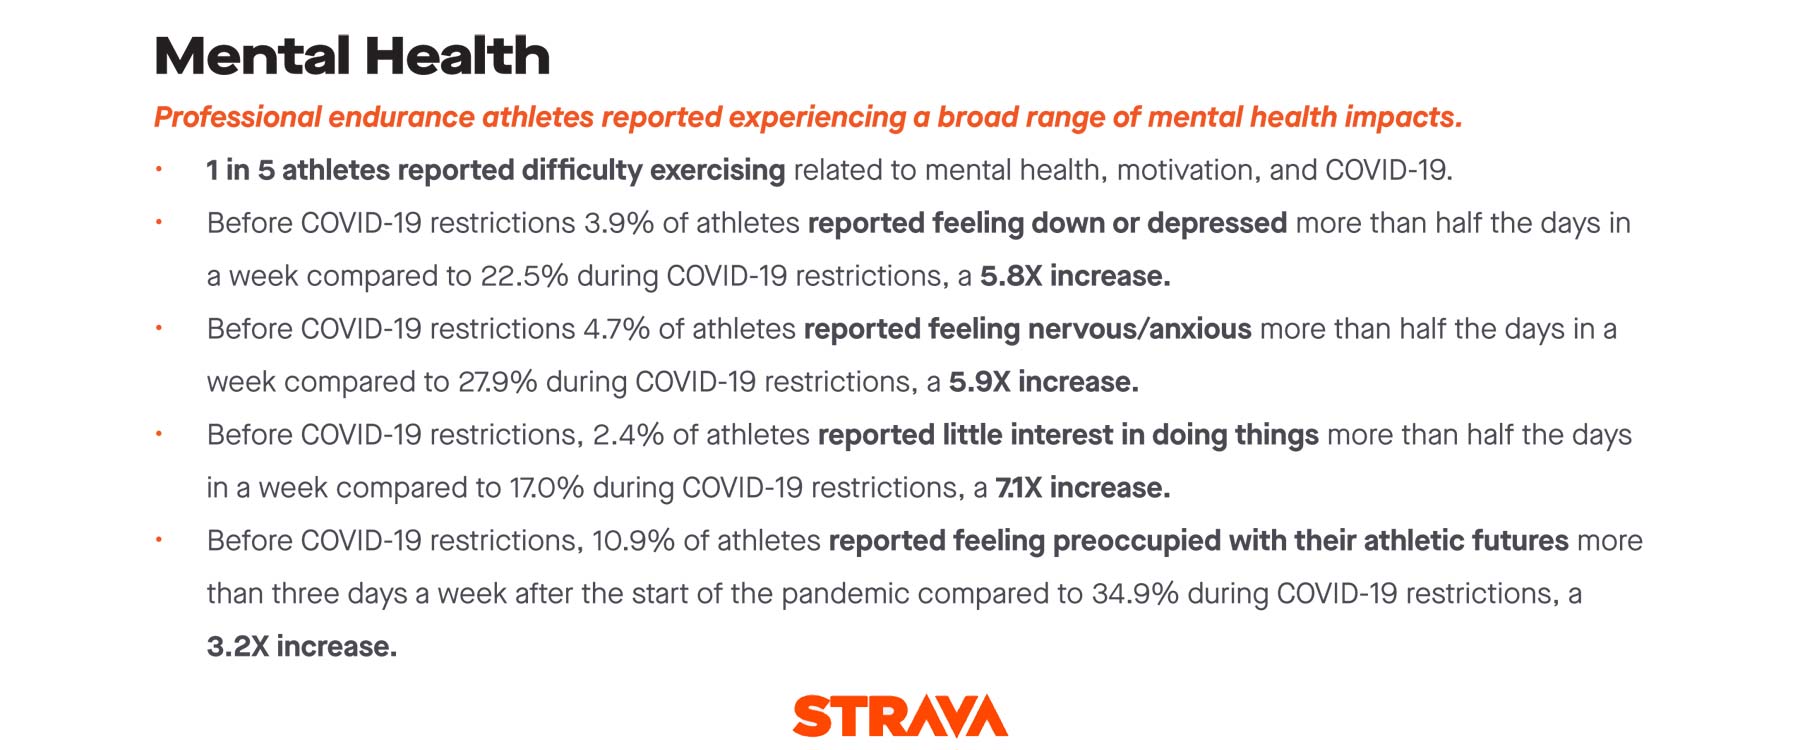 Strava + Stanford professional athlete COVID-19 impacts study, Mental Health impacts